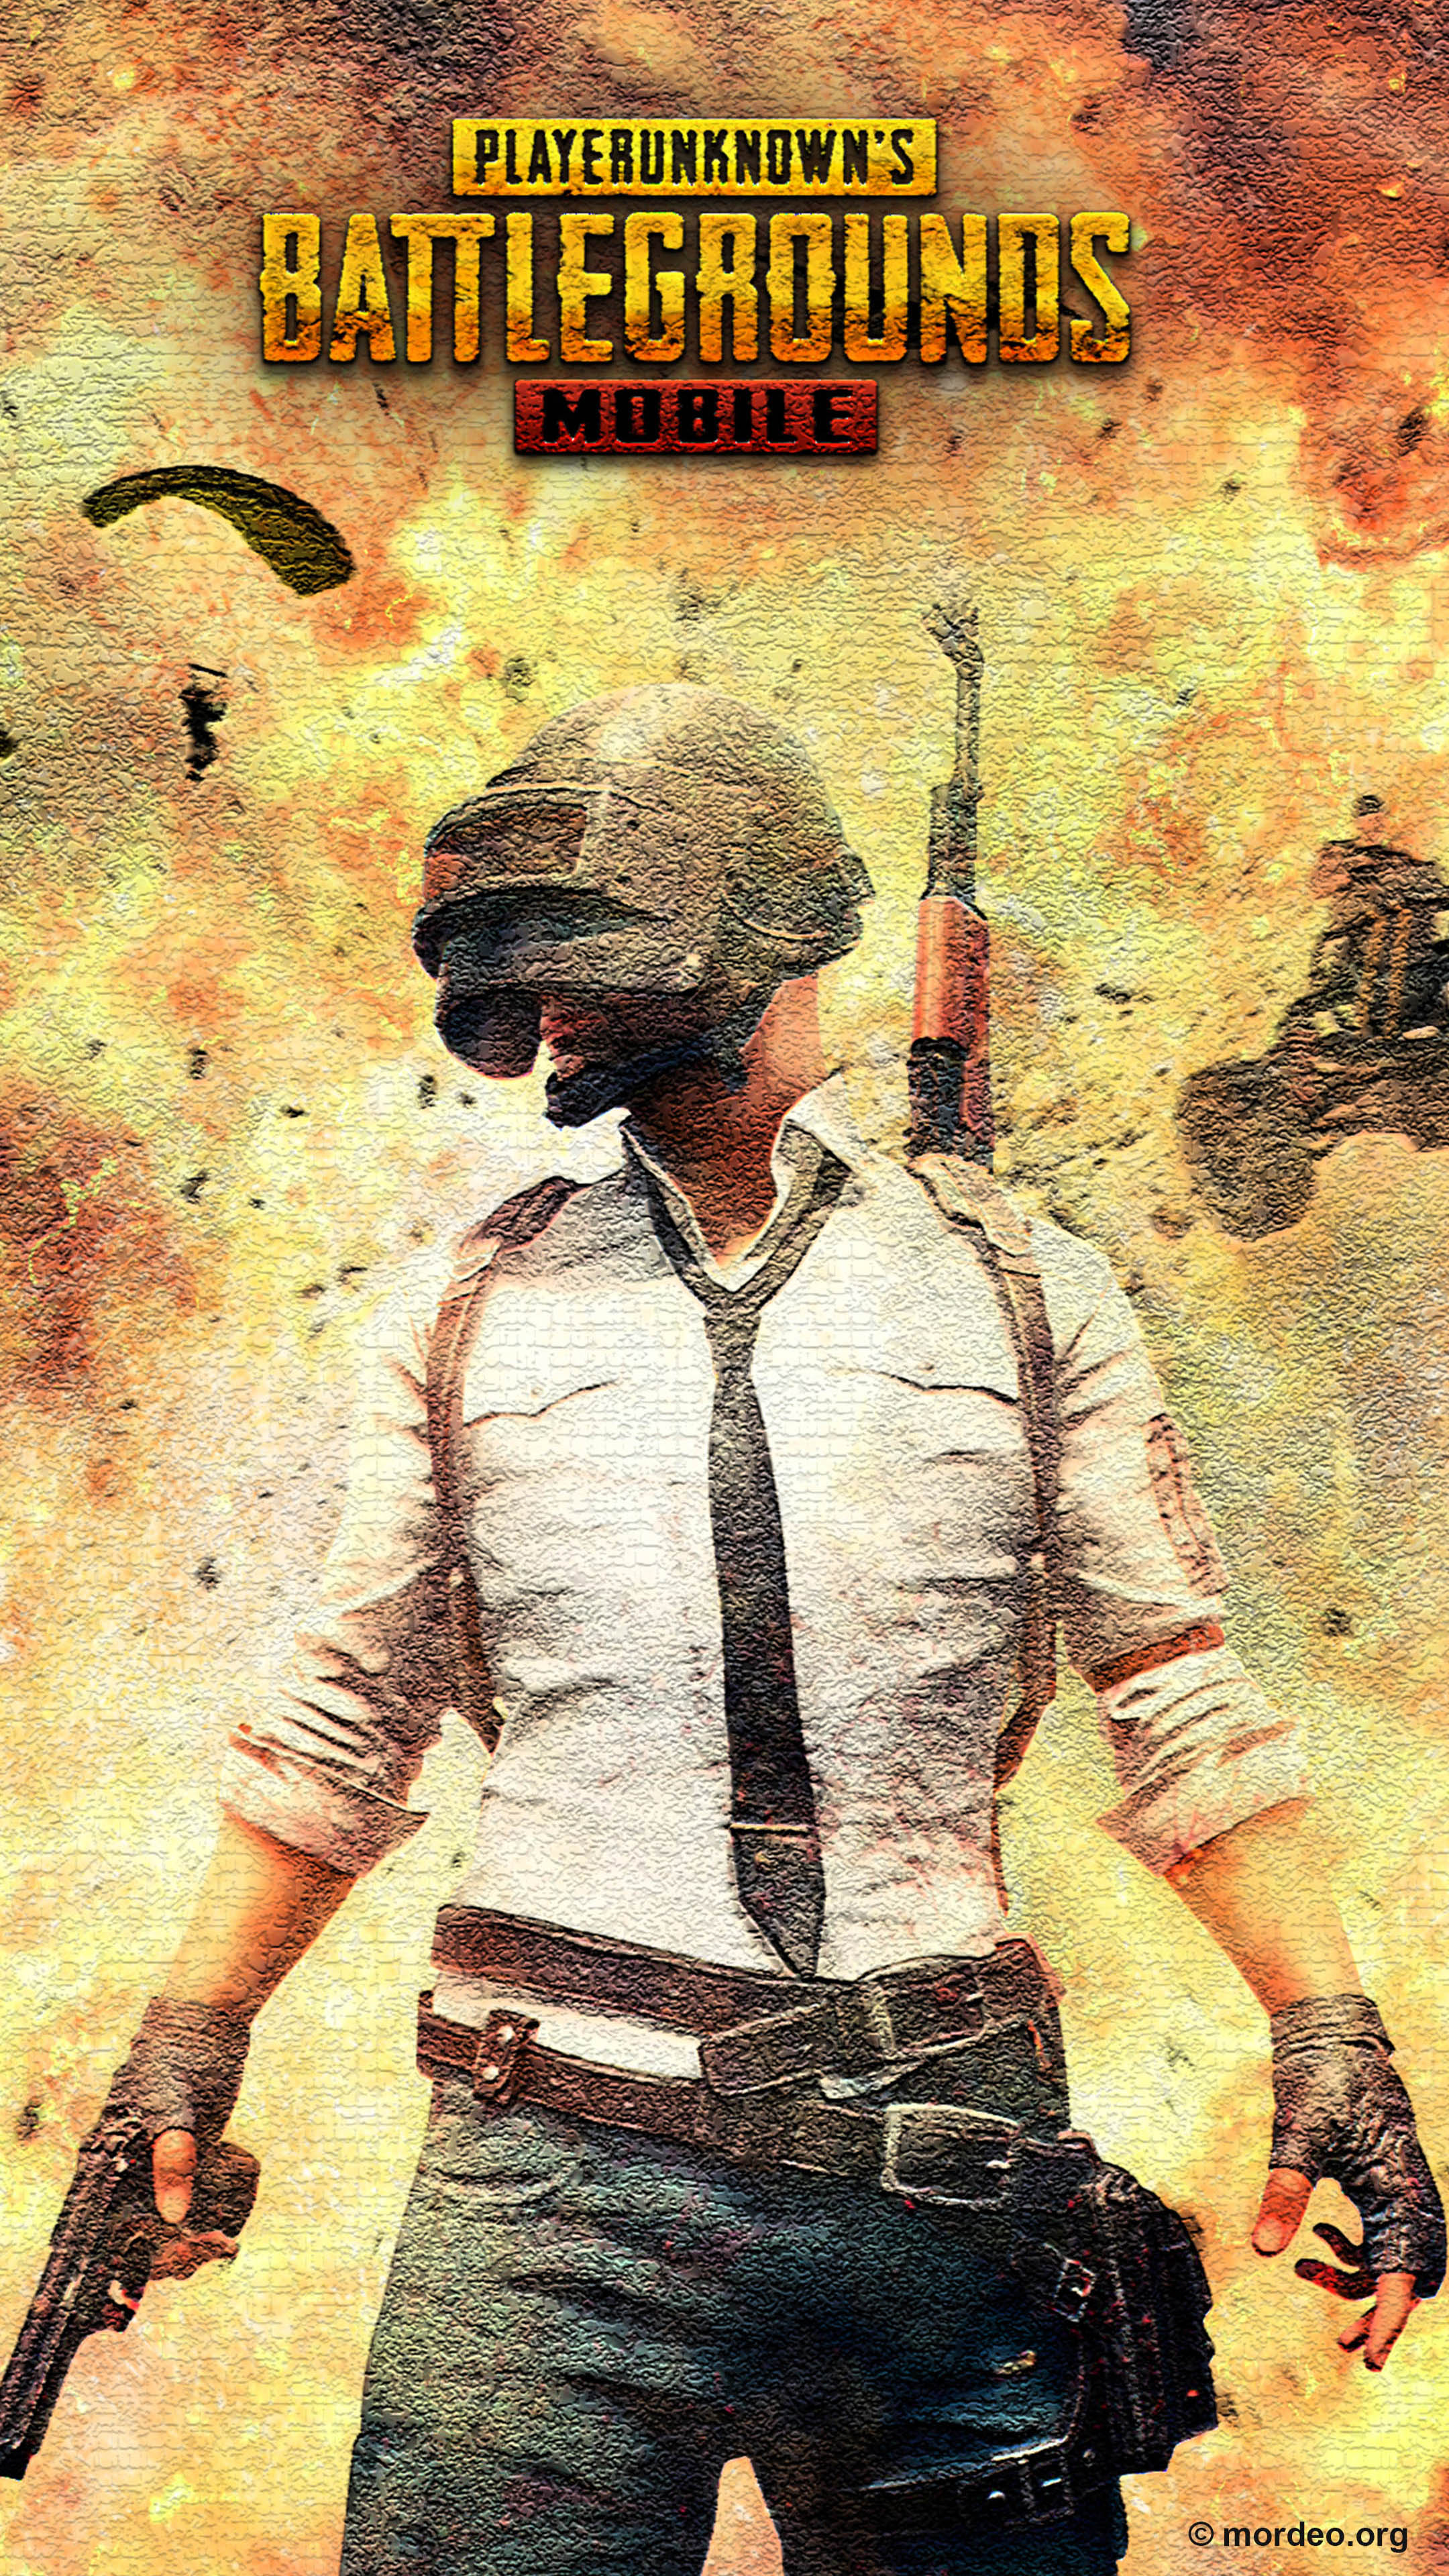 Pubg For Mobile Wallpapers Wallpaper Cave